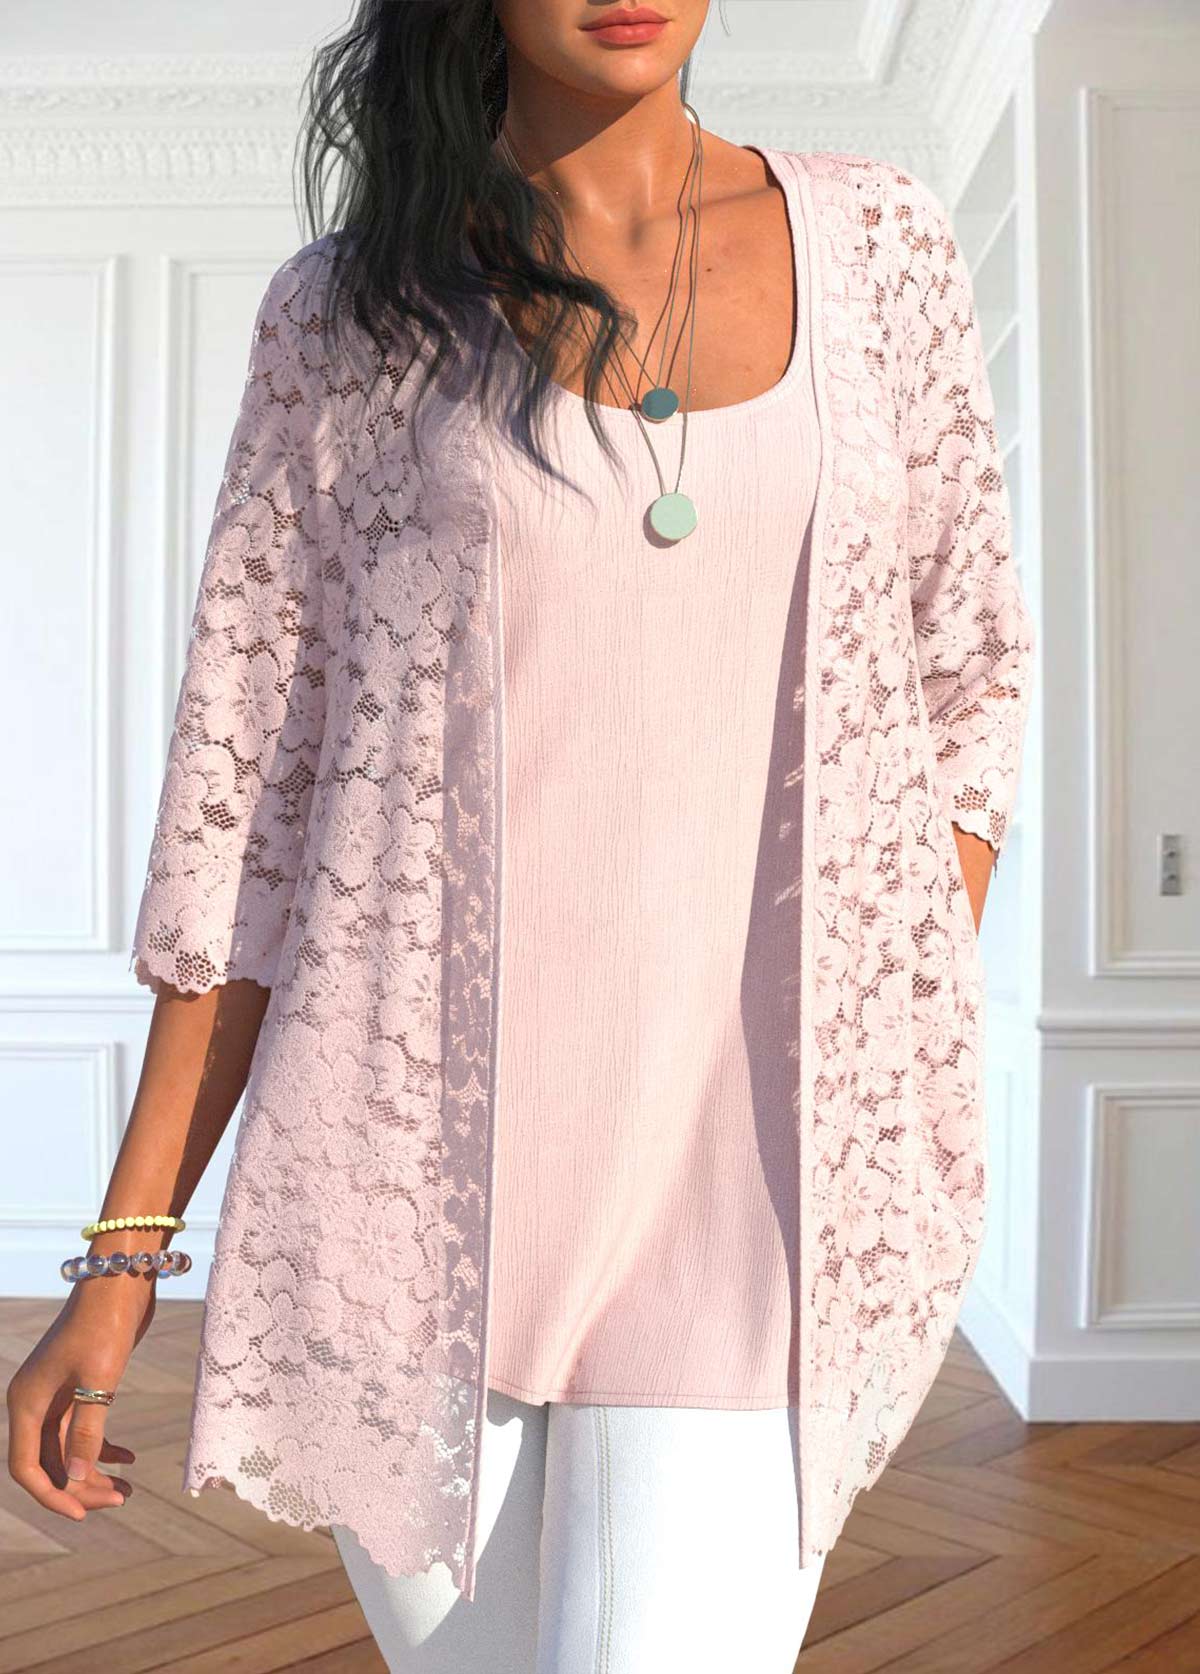 Light Pink Lace Tank Top and Cardigan